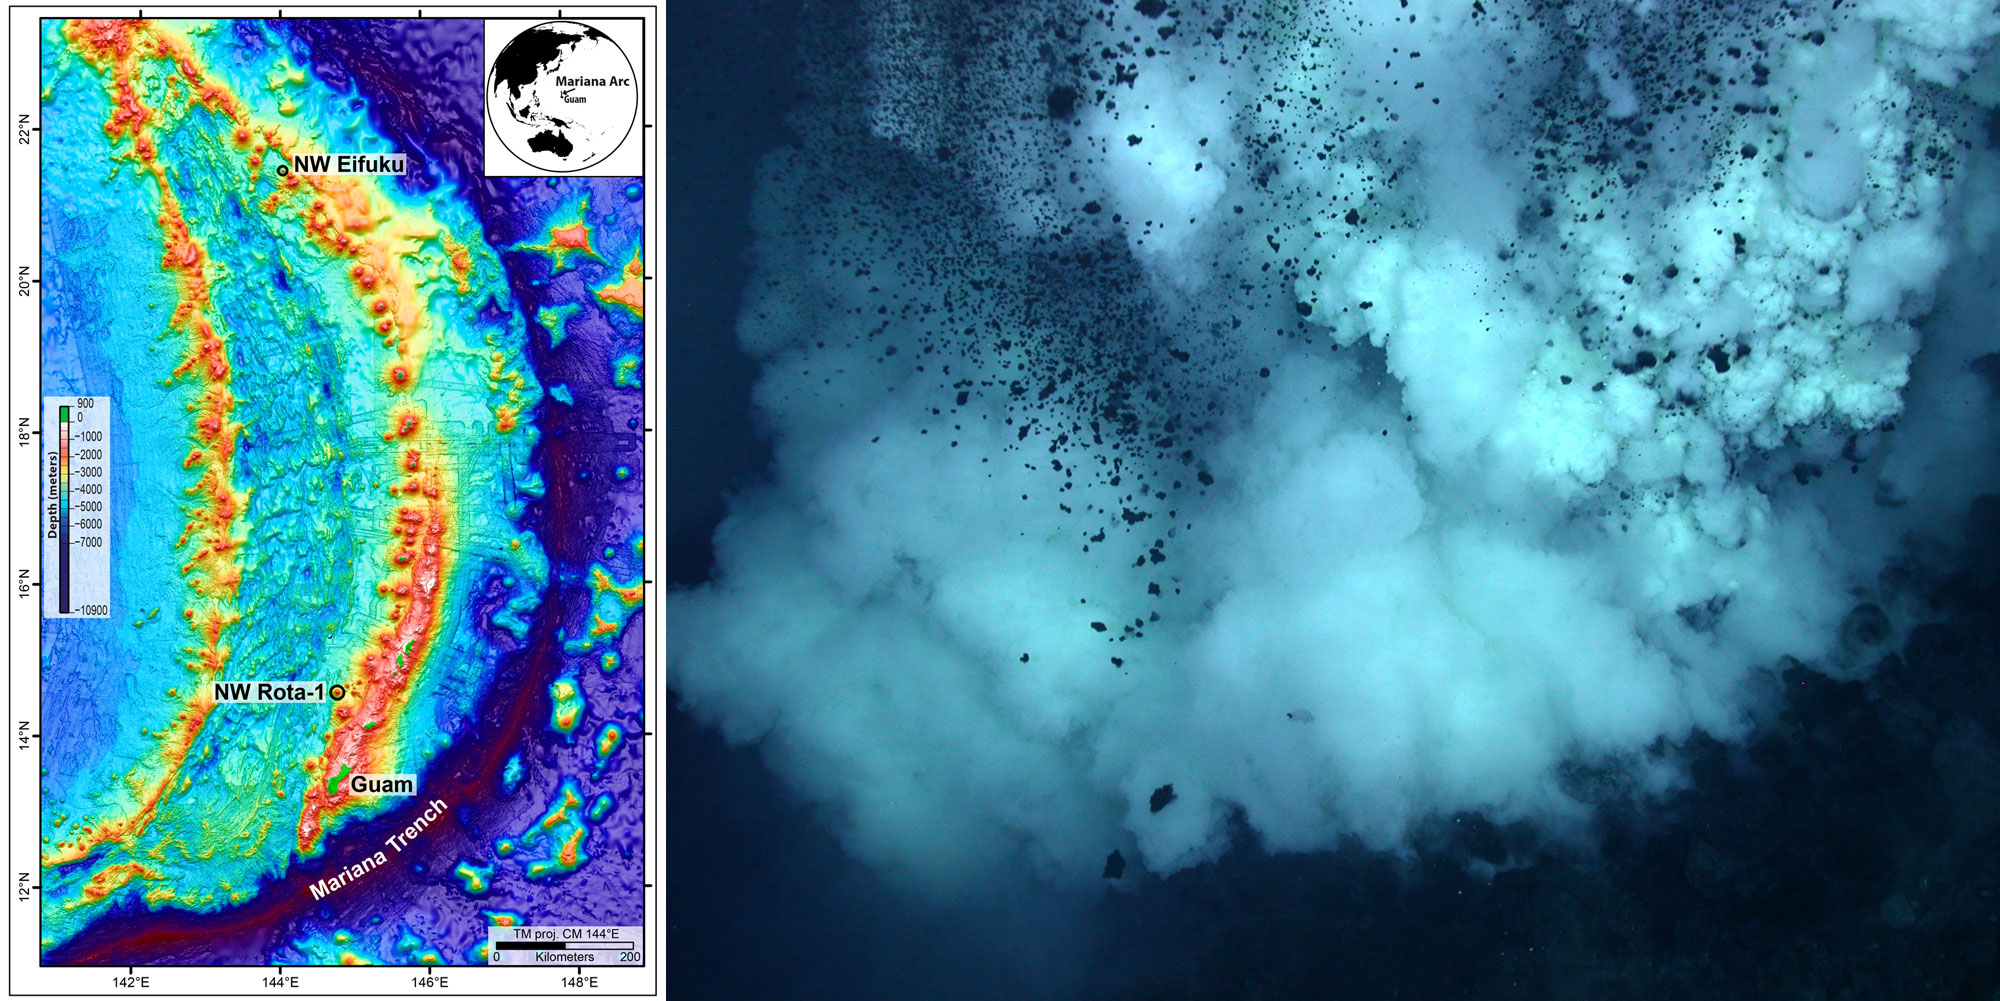 2-Panel image. Panel 1: Relief map the the Mariana Trench and surrounding area showing the location of NW Rota-1 volcano. Panel 2: Photo of an underwater eruption of the NW Rota-1 volcano showing rock and gas.